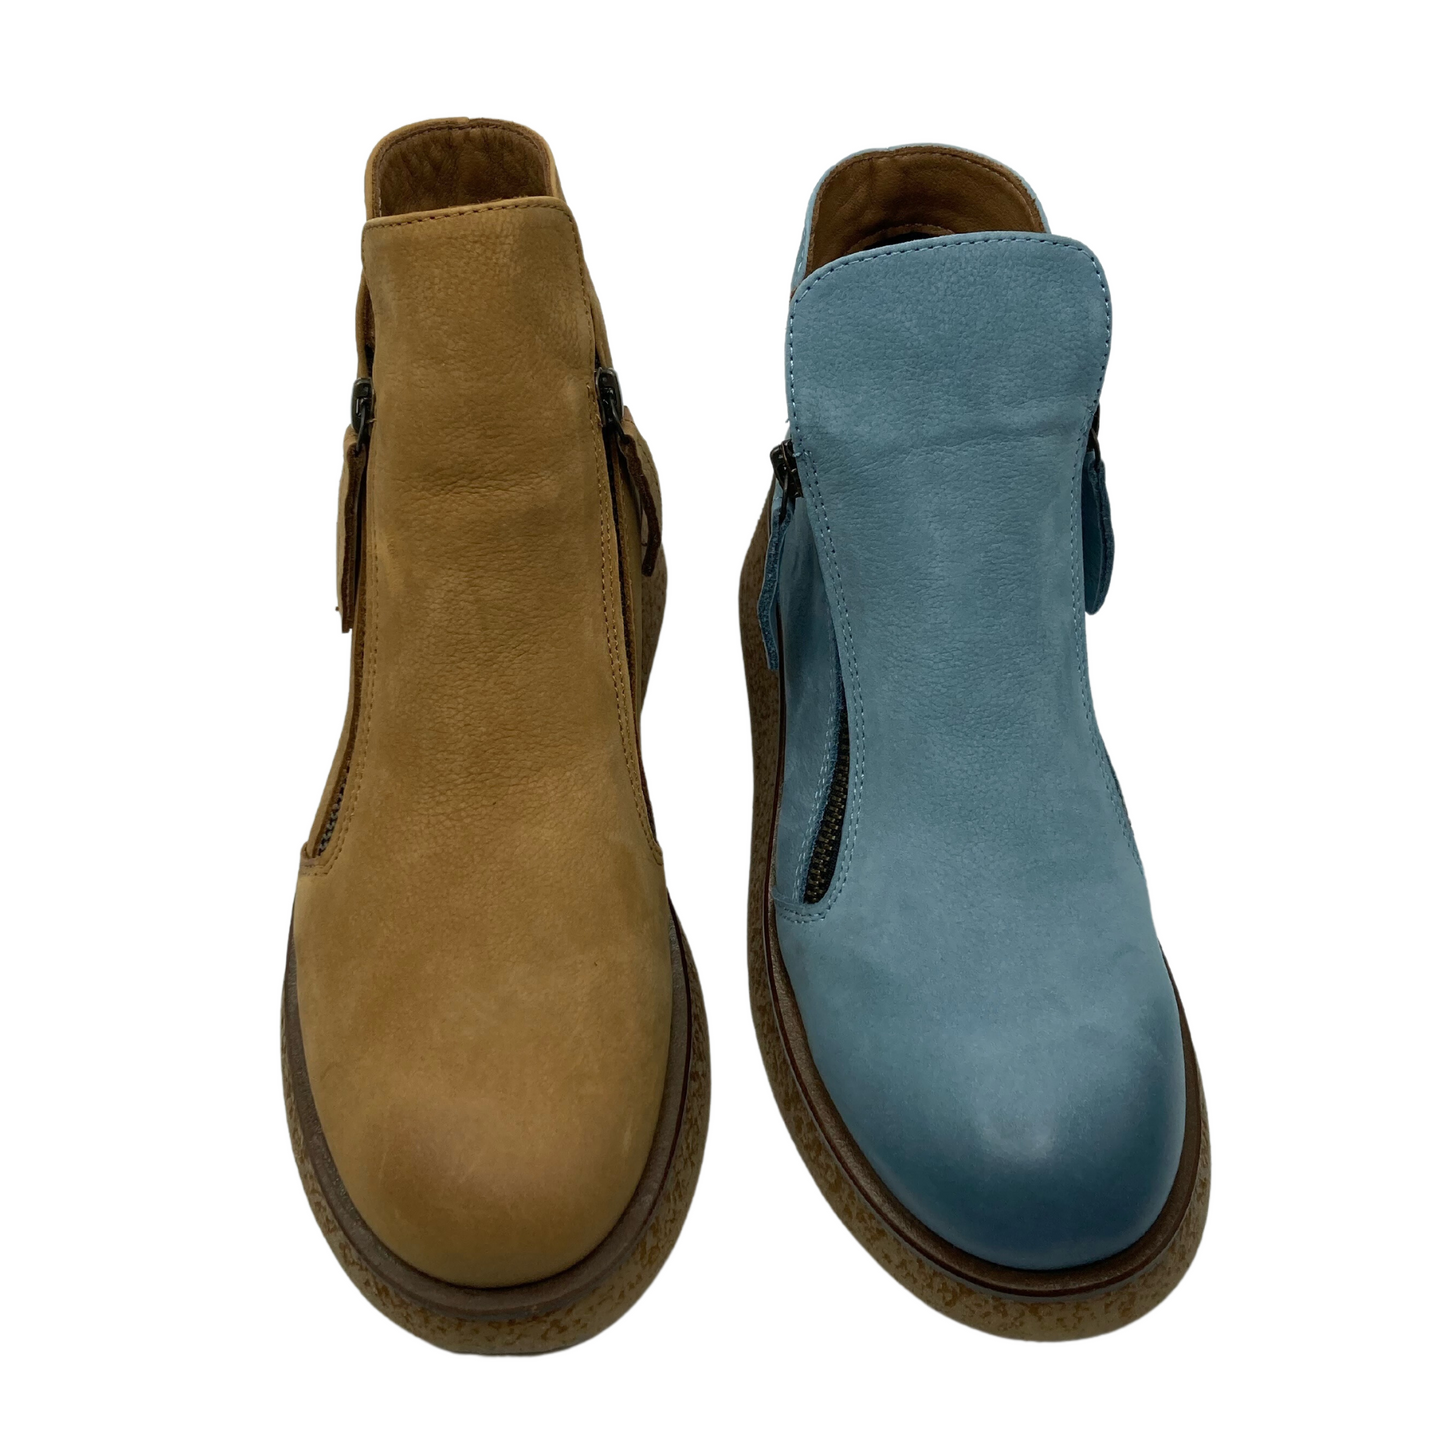 Top view of two short boots. The left one is light brown and the right one is sky blue. Both have double side zipper closures and rounded toes